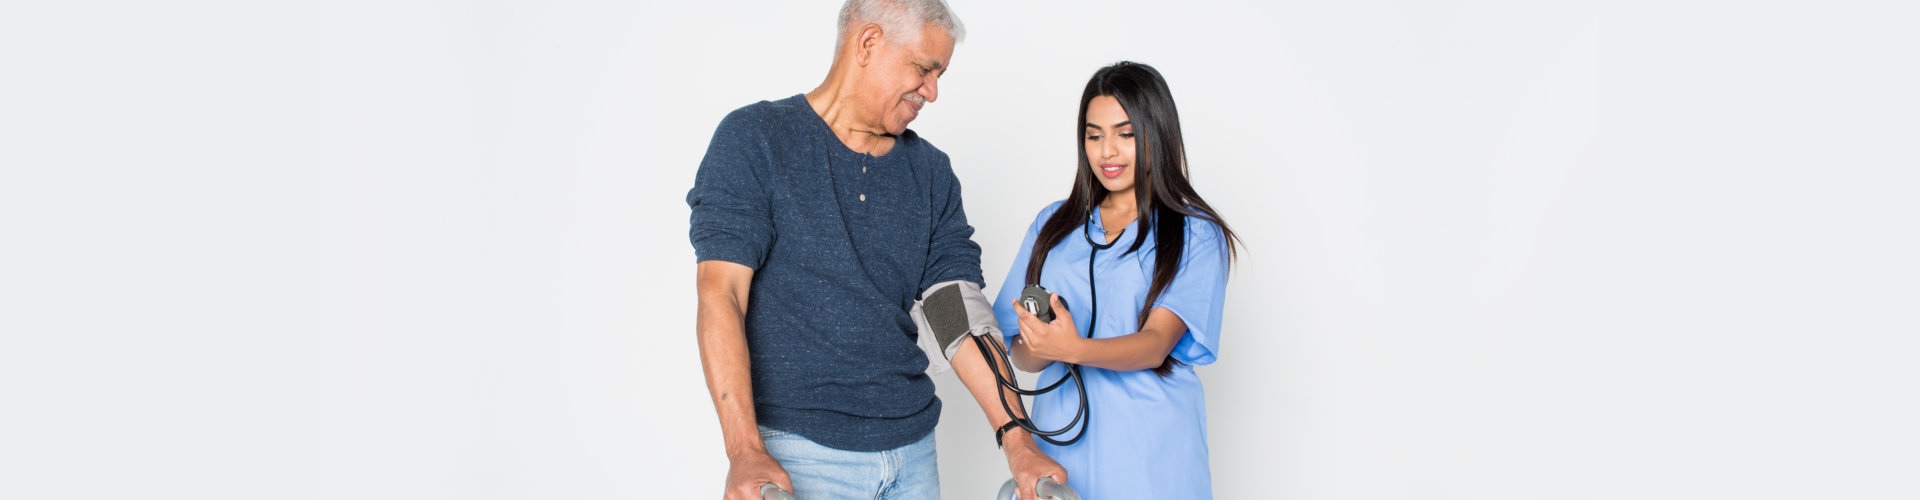 caregiver checking the blood pressure of her patient